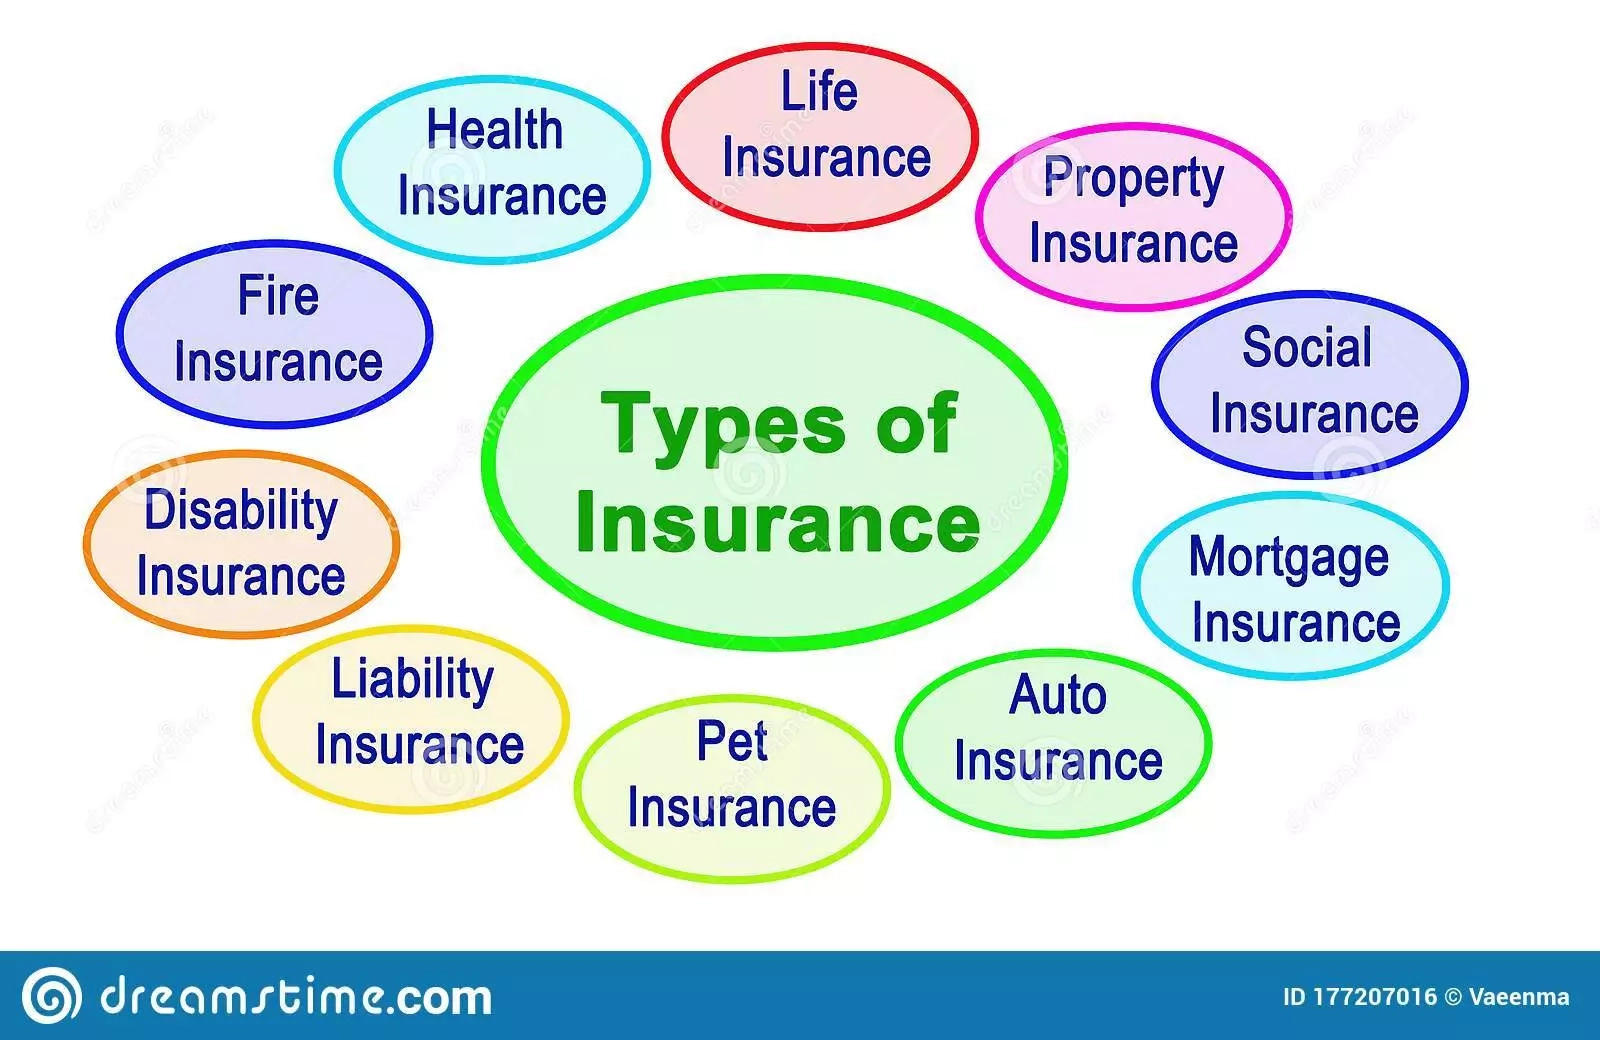 8 Different Types of Insurance ProGuide